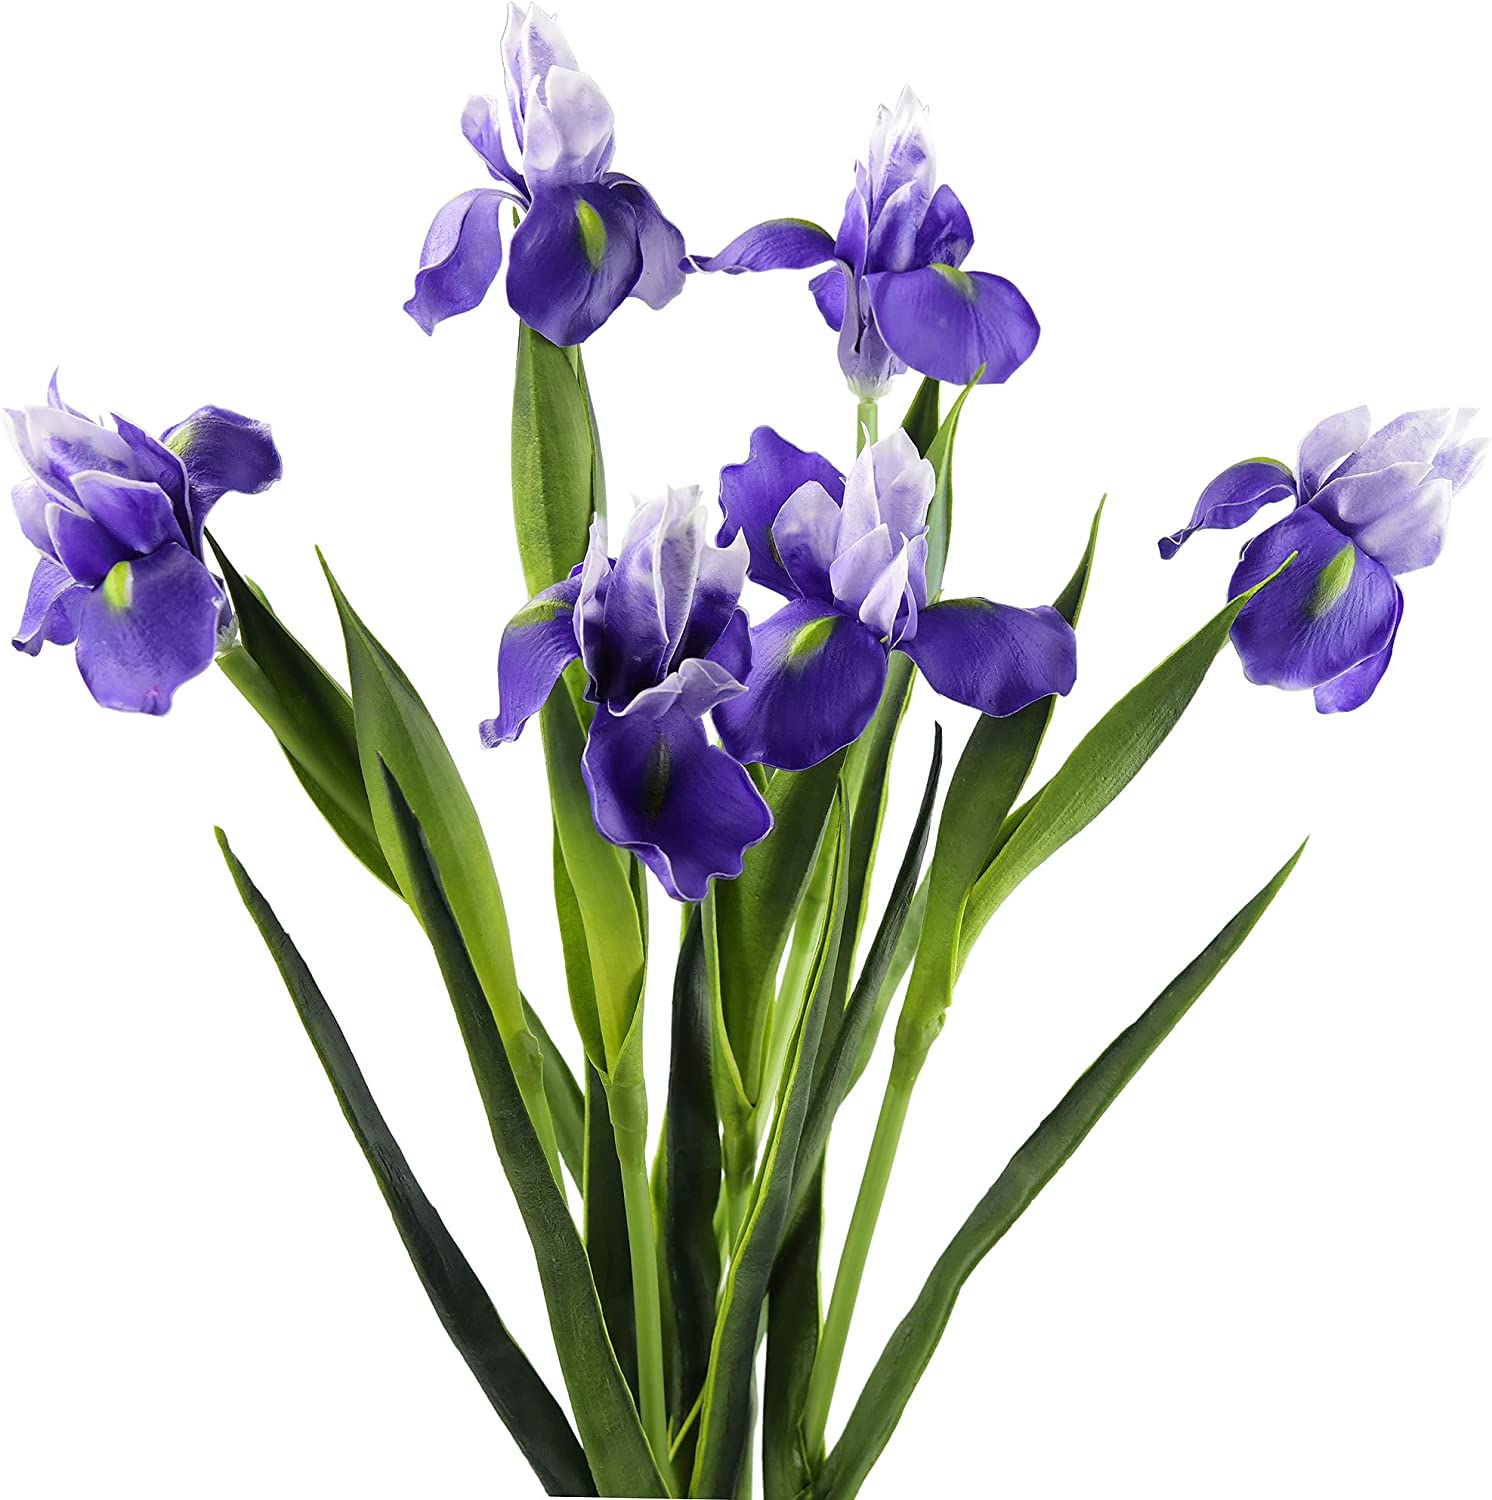 Iris Symbolism in Christianity – What Does Its Flower Mean?